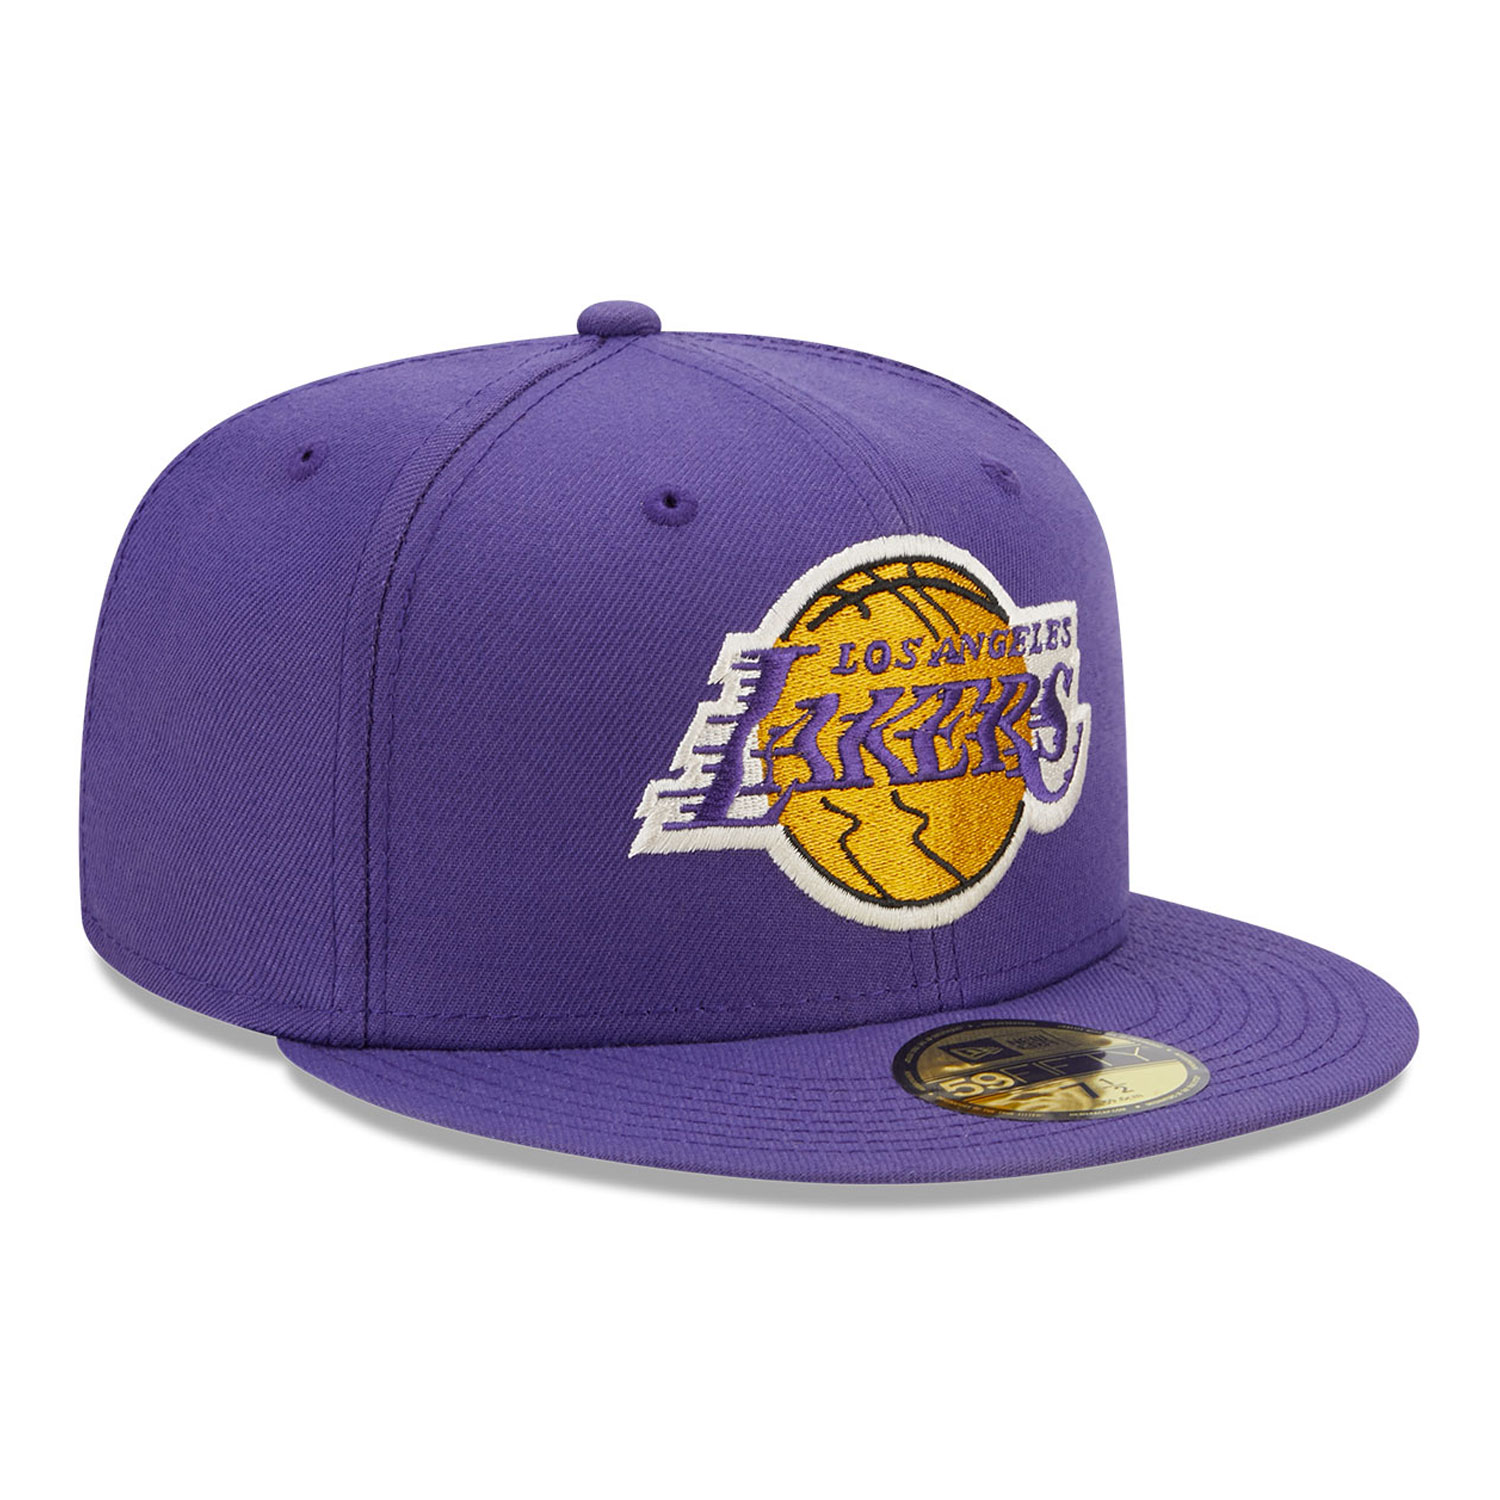 LA Lakers Twilight Fantasy Purple 59FIFTY Fitted Cap